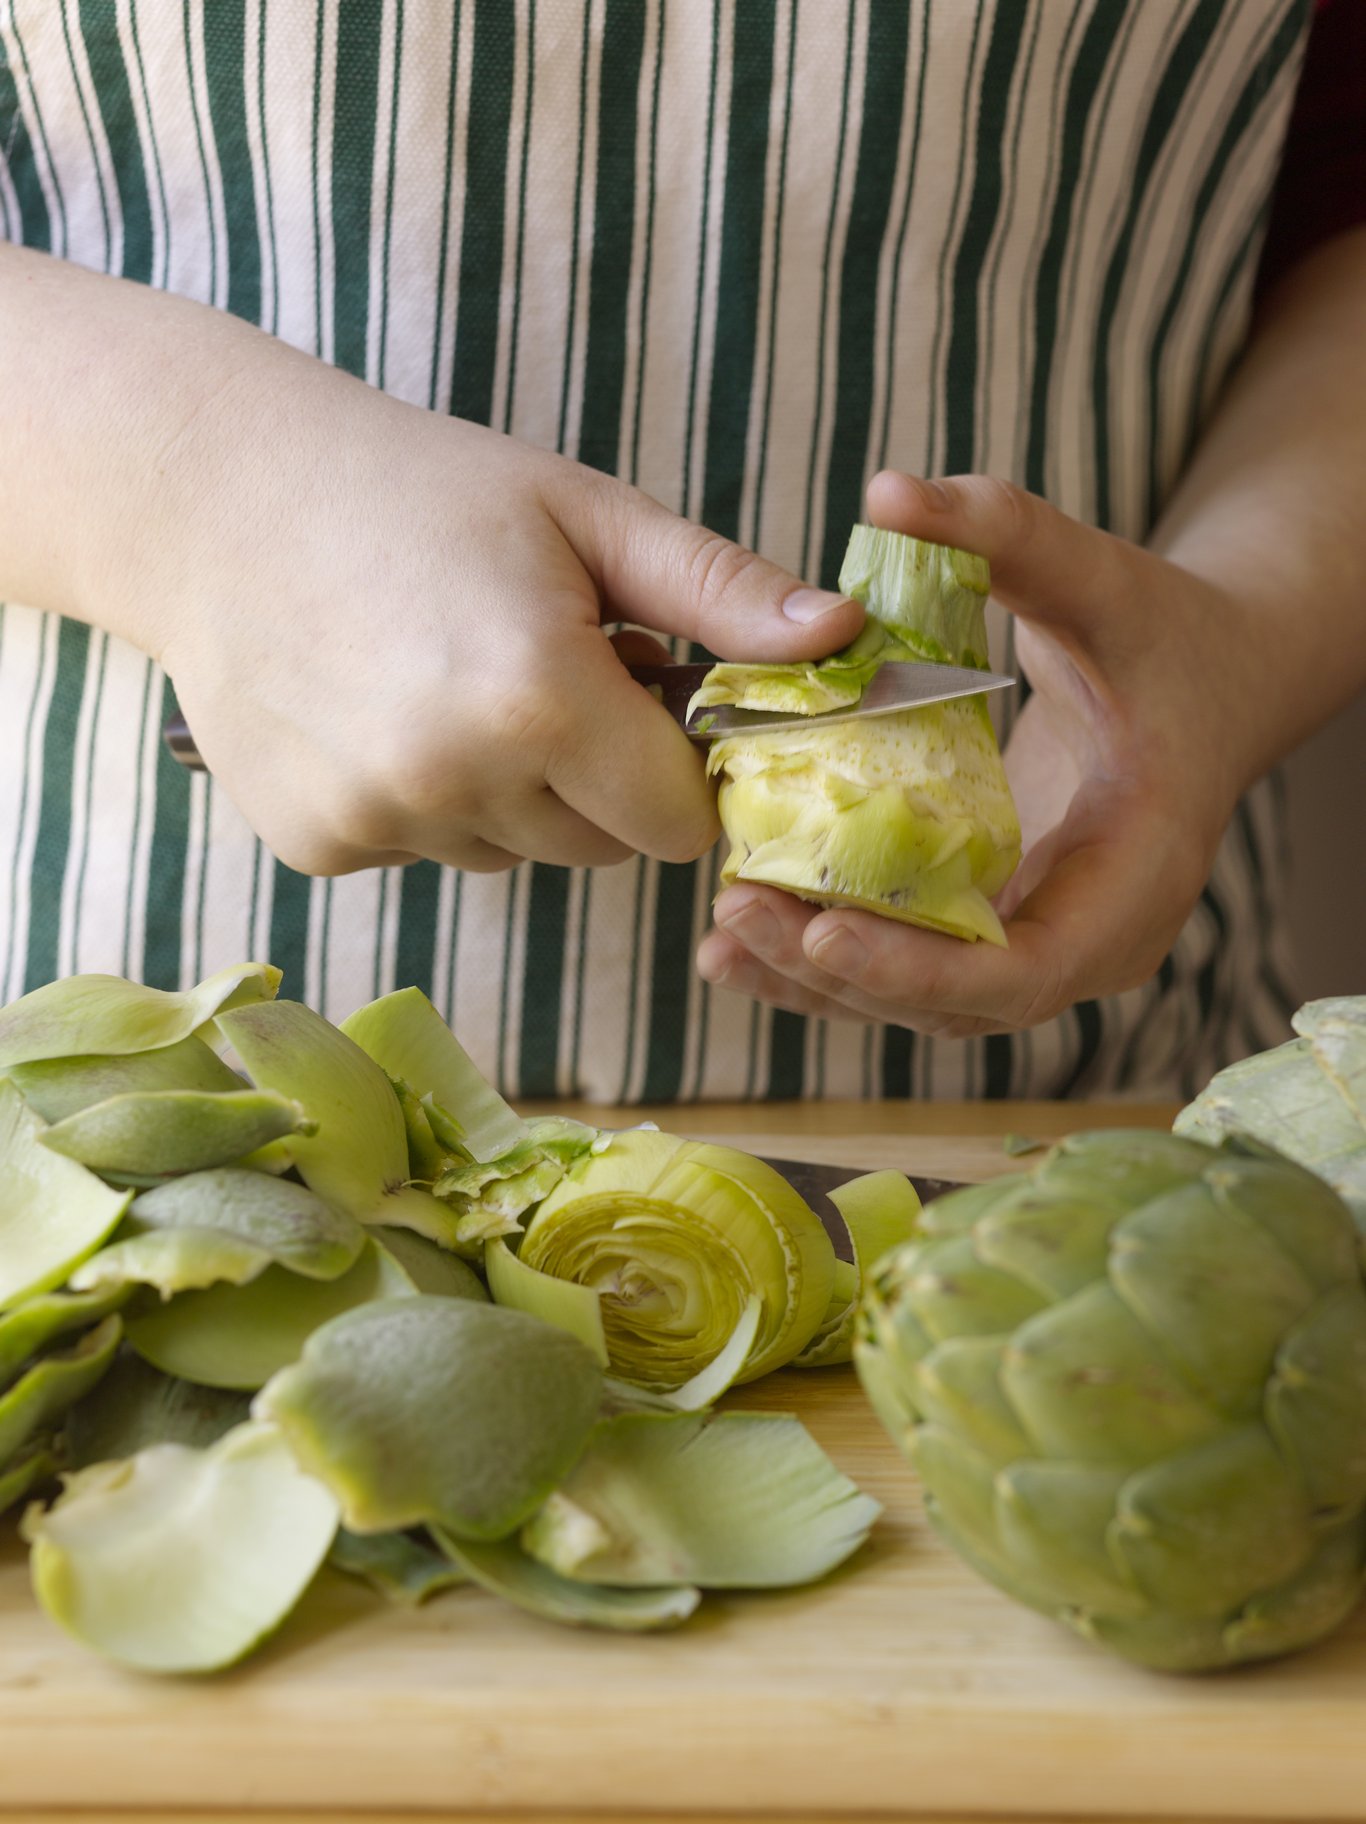 Trim away the tough outer leaves with a paring knife.